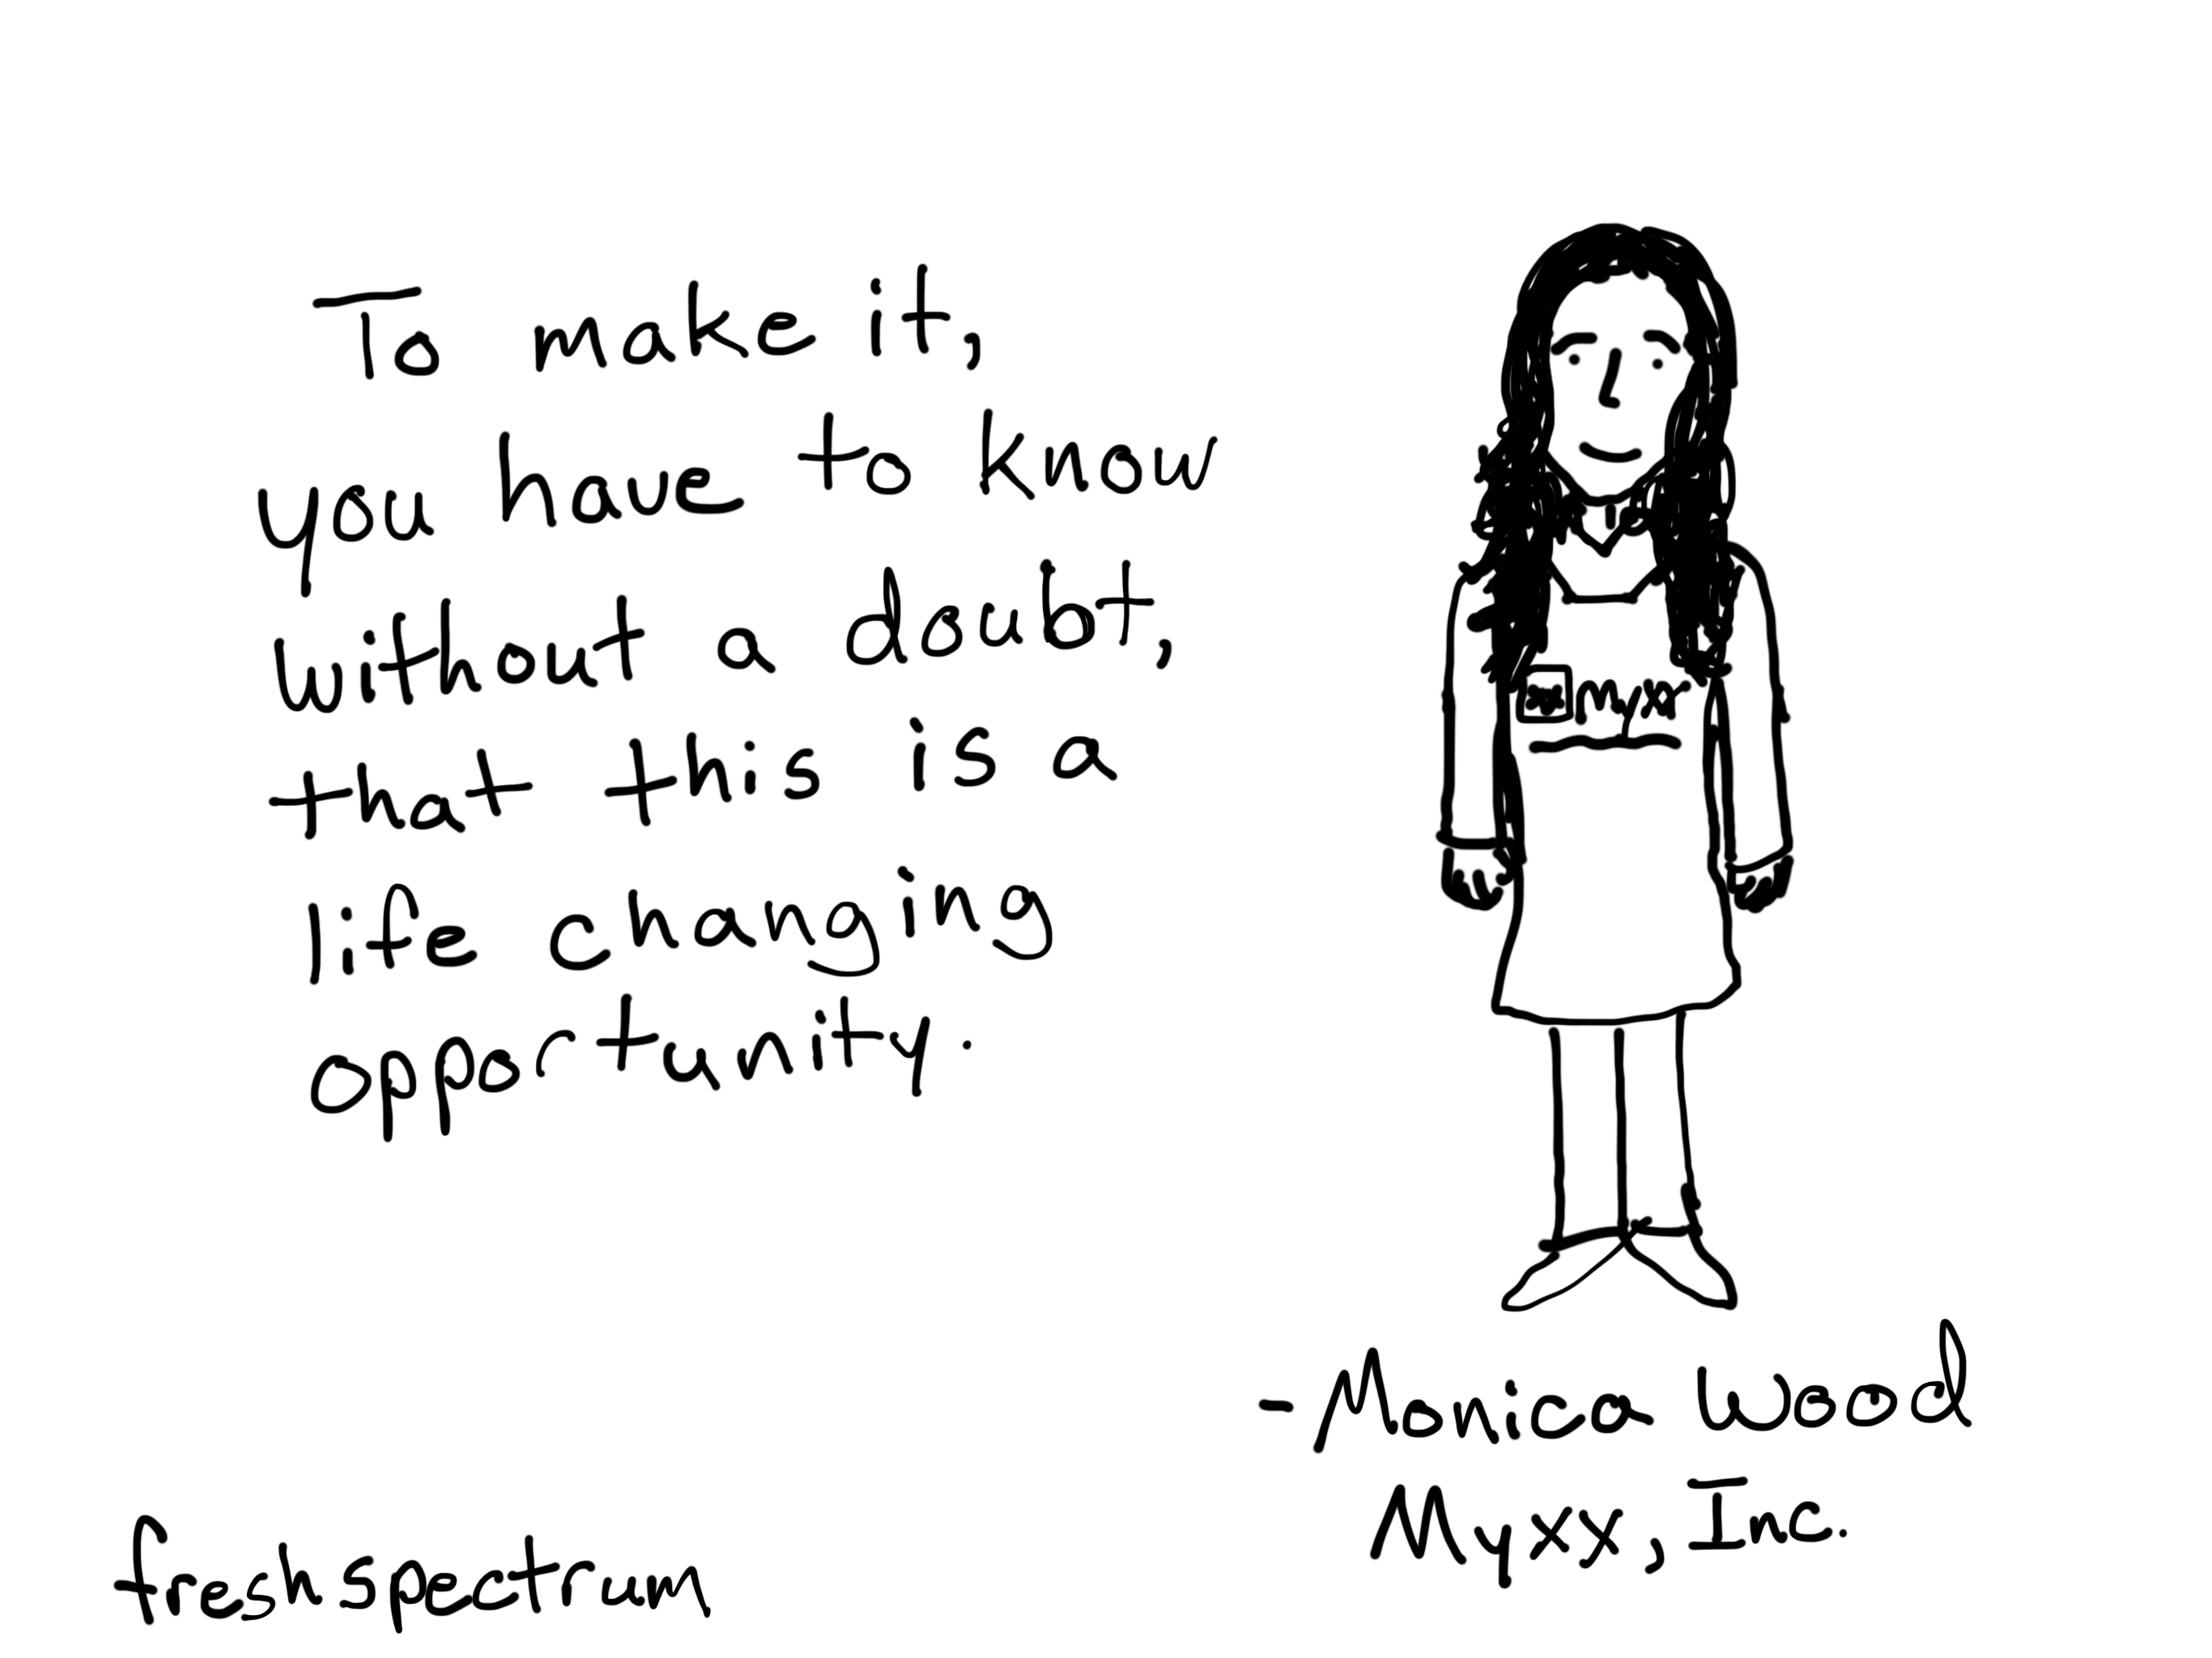 Freshspectrum cartoon with a quote from Monica Wood of Myxx